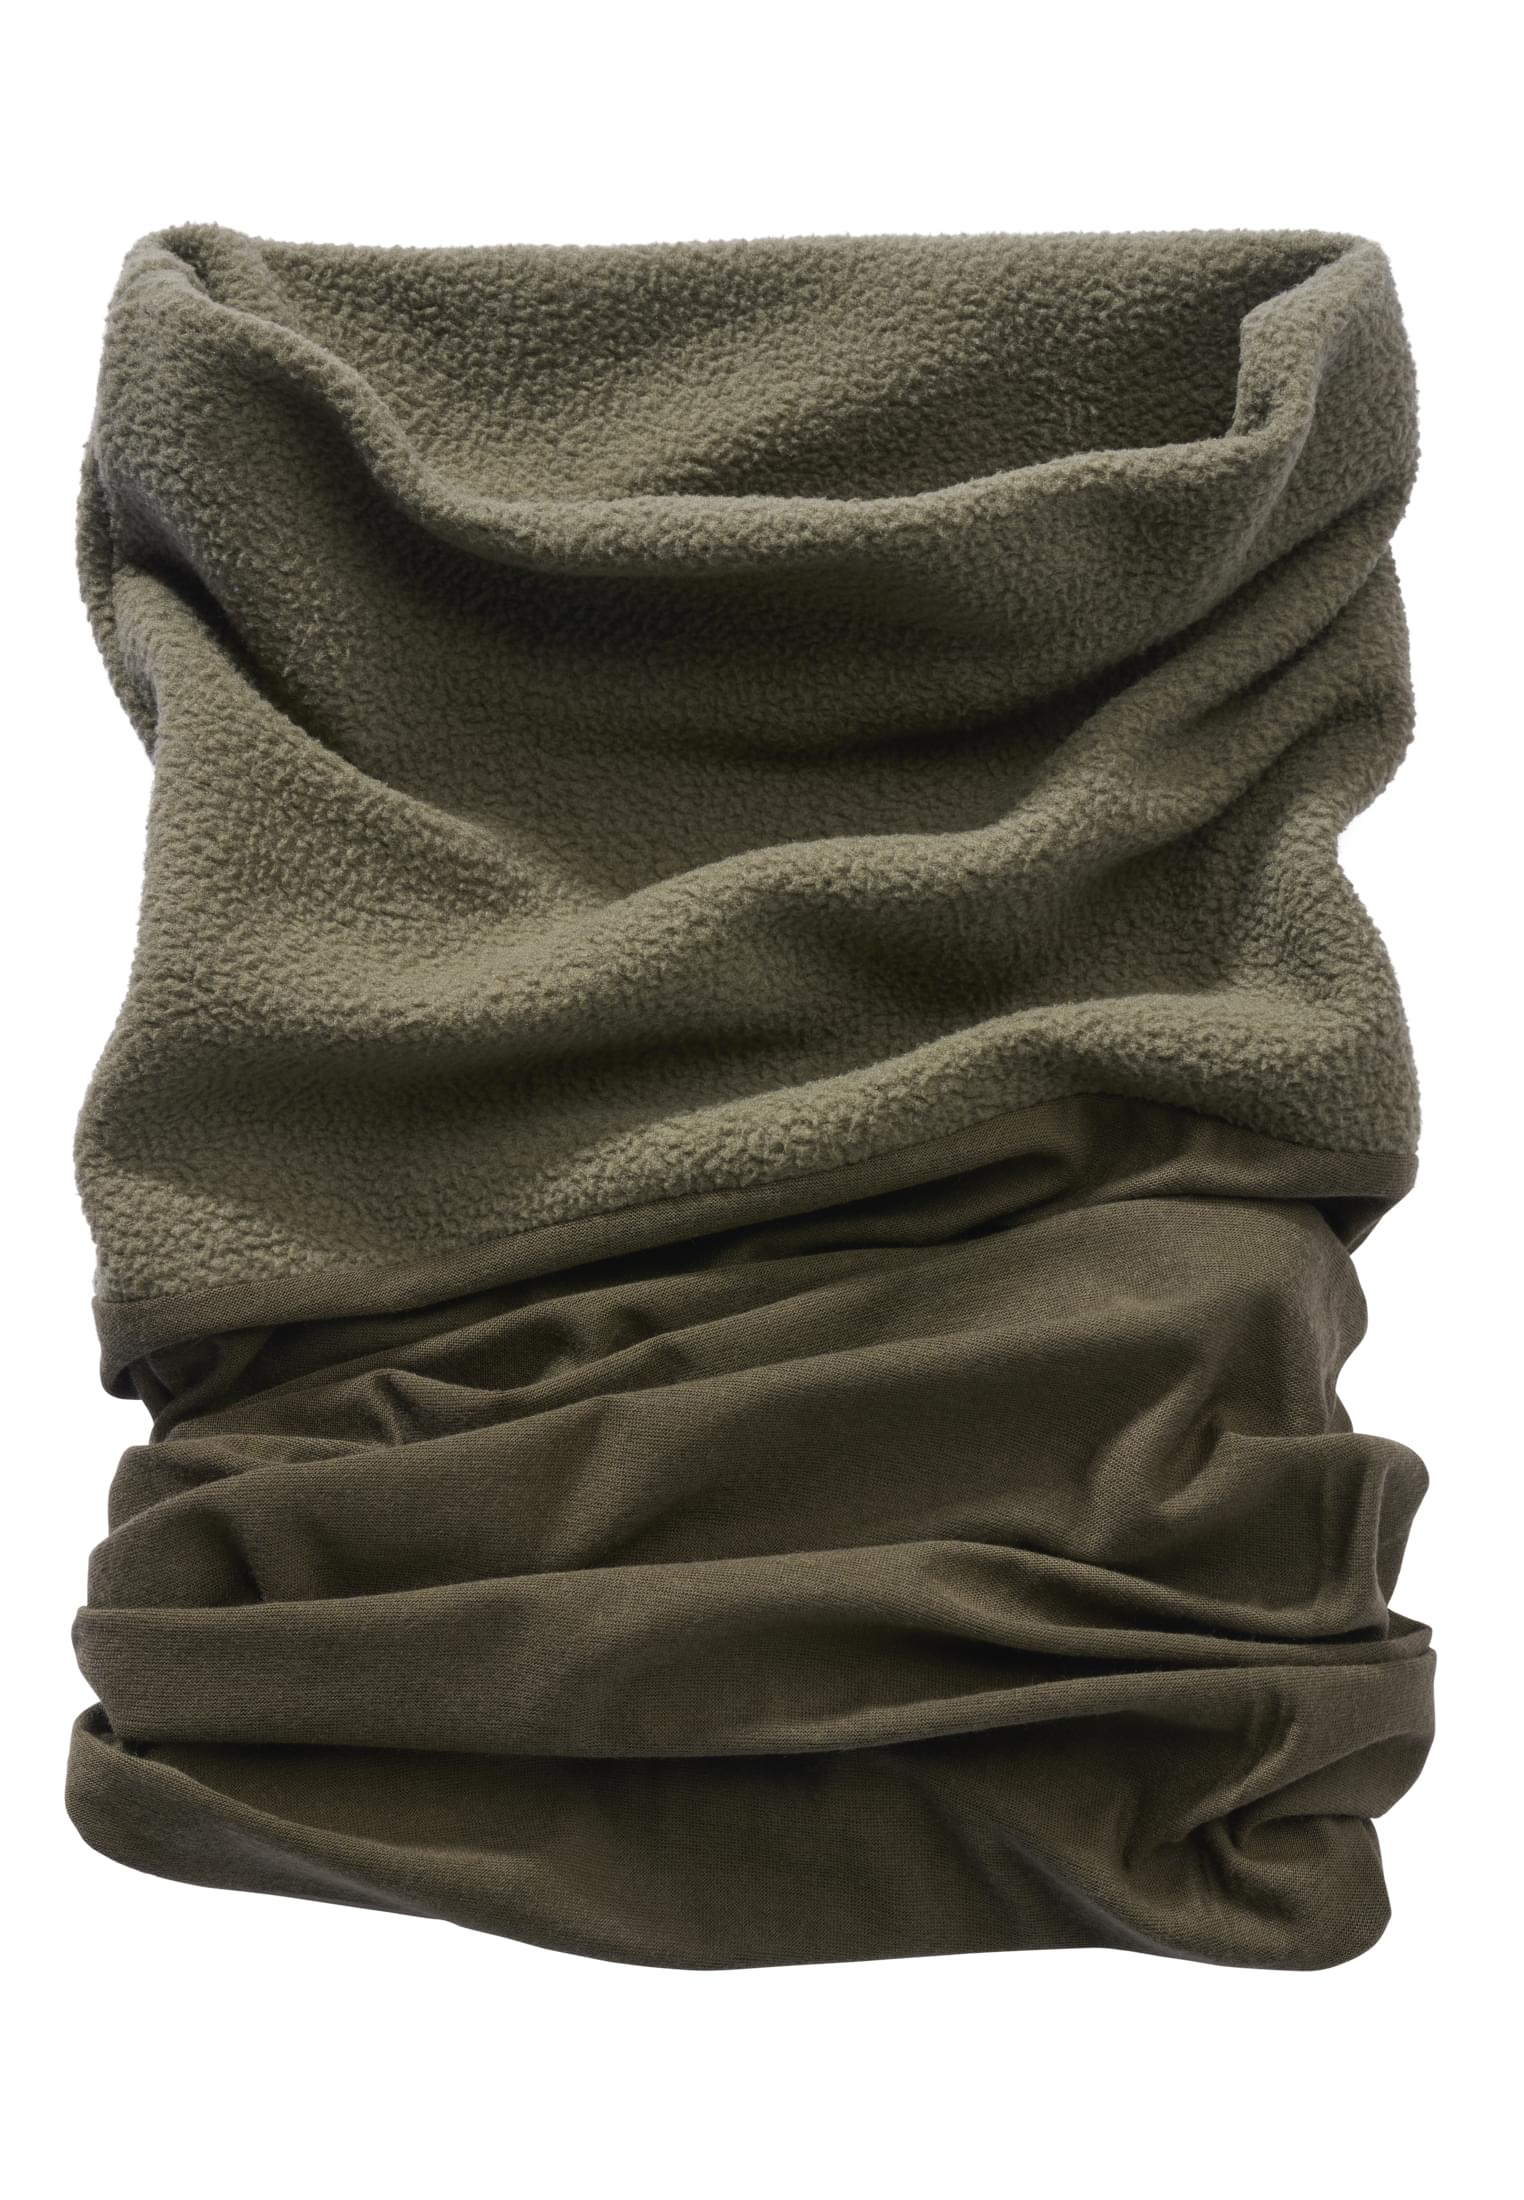 Accessoires Multifunktionstuch Fleece in Farbe olive